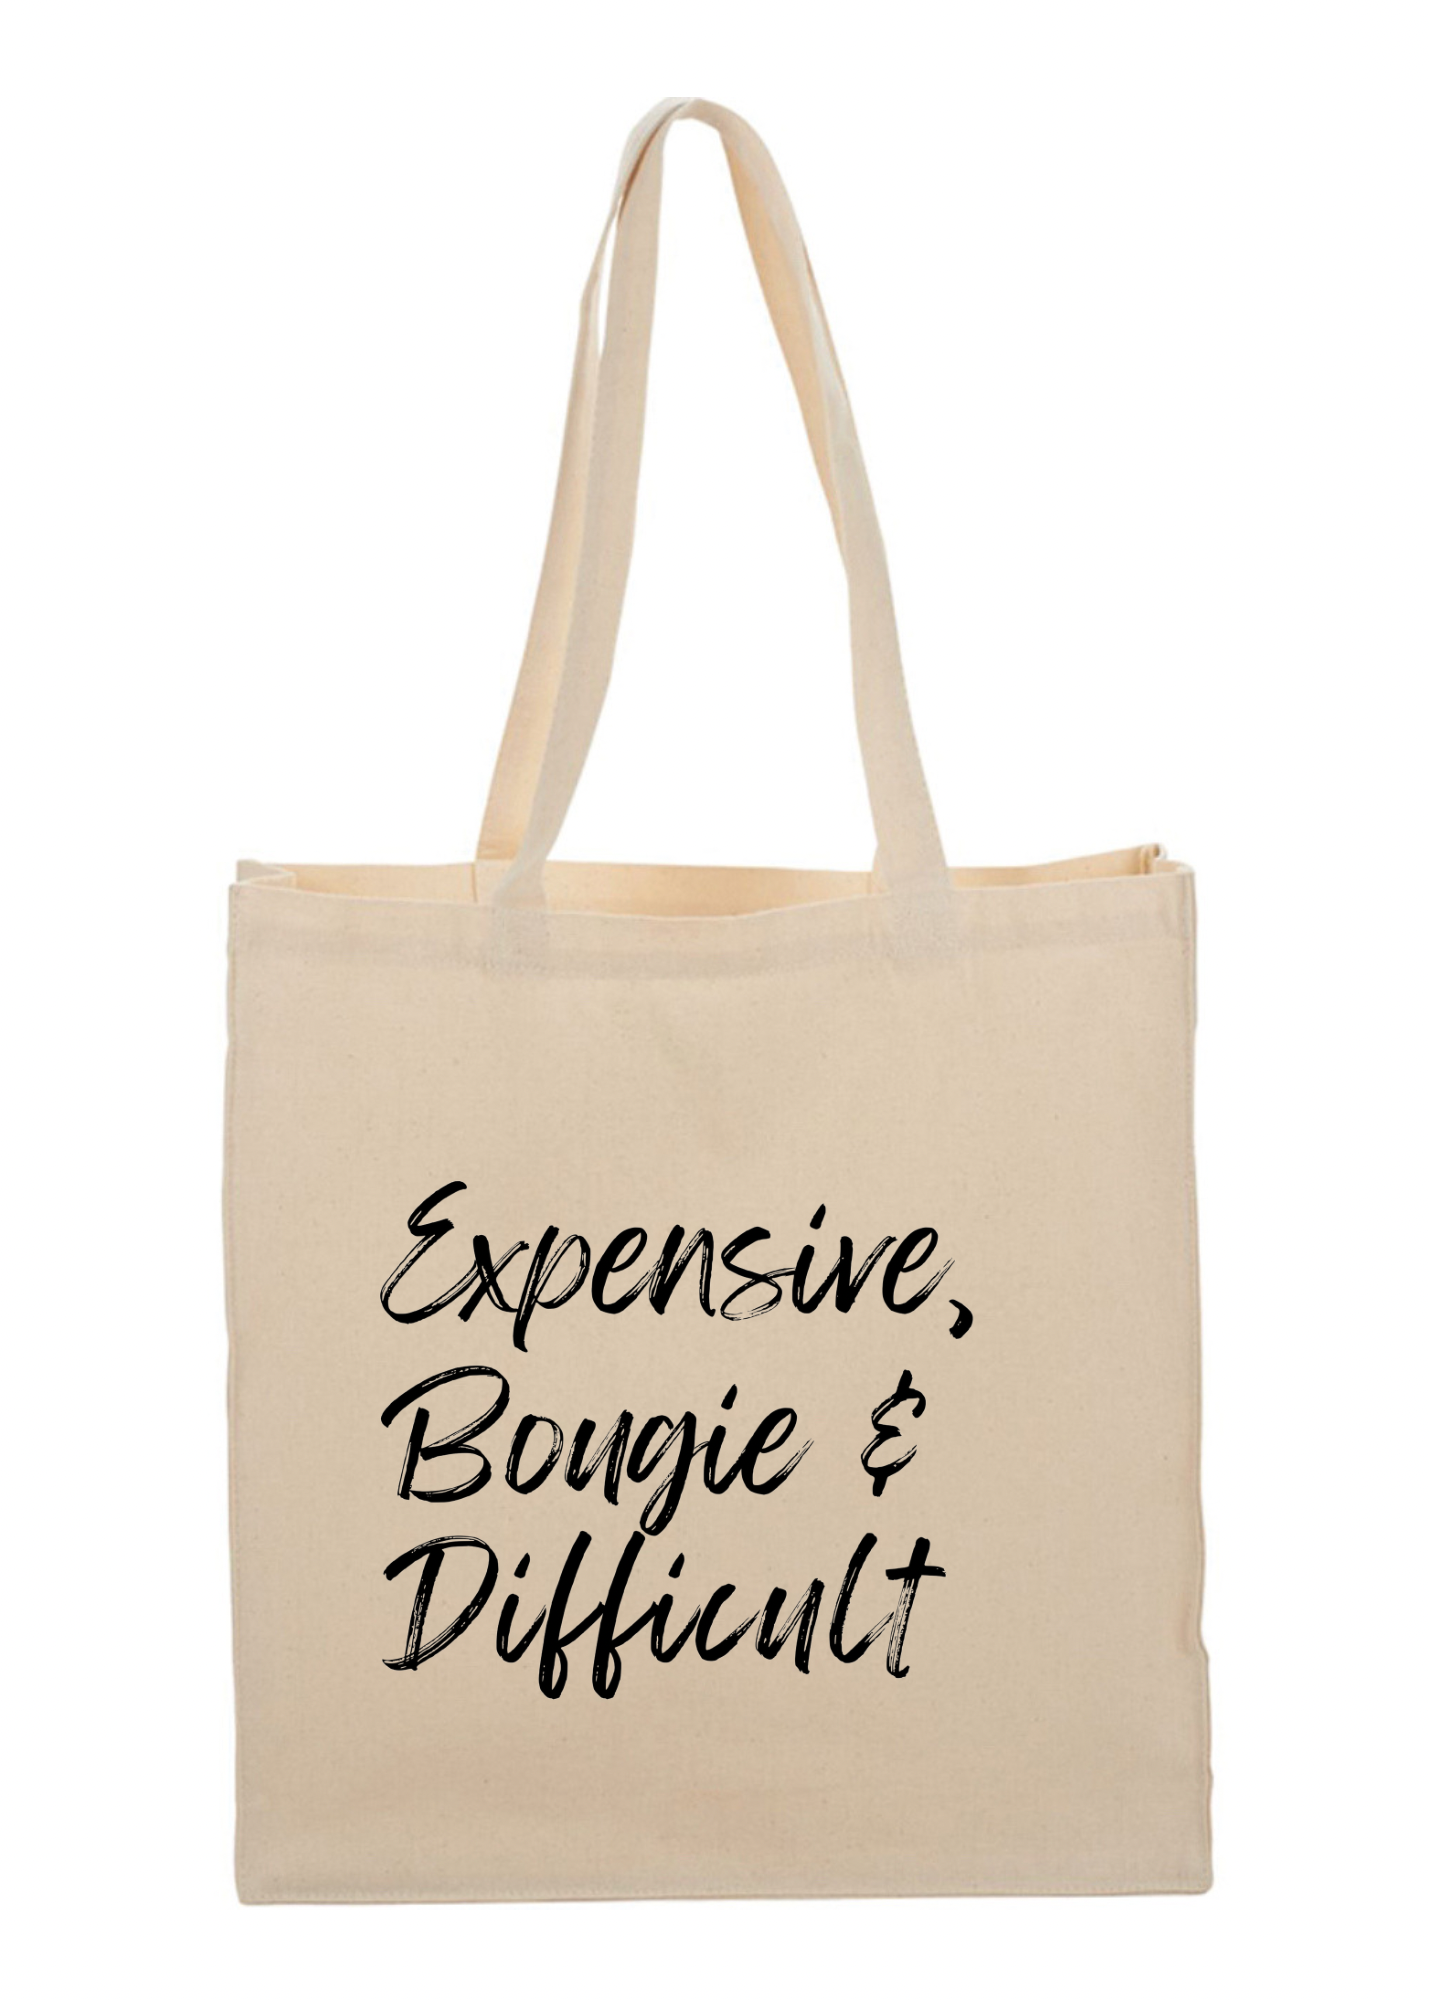 Expensive, Bougie & Difficult Tote Bags - 2 colors available